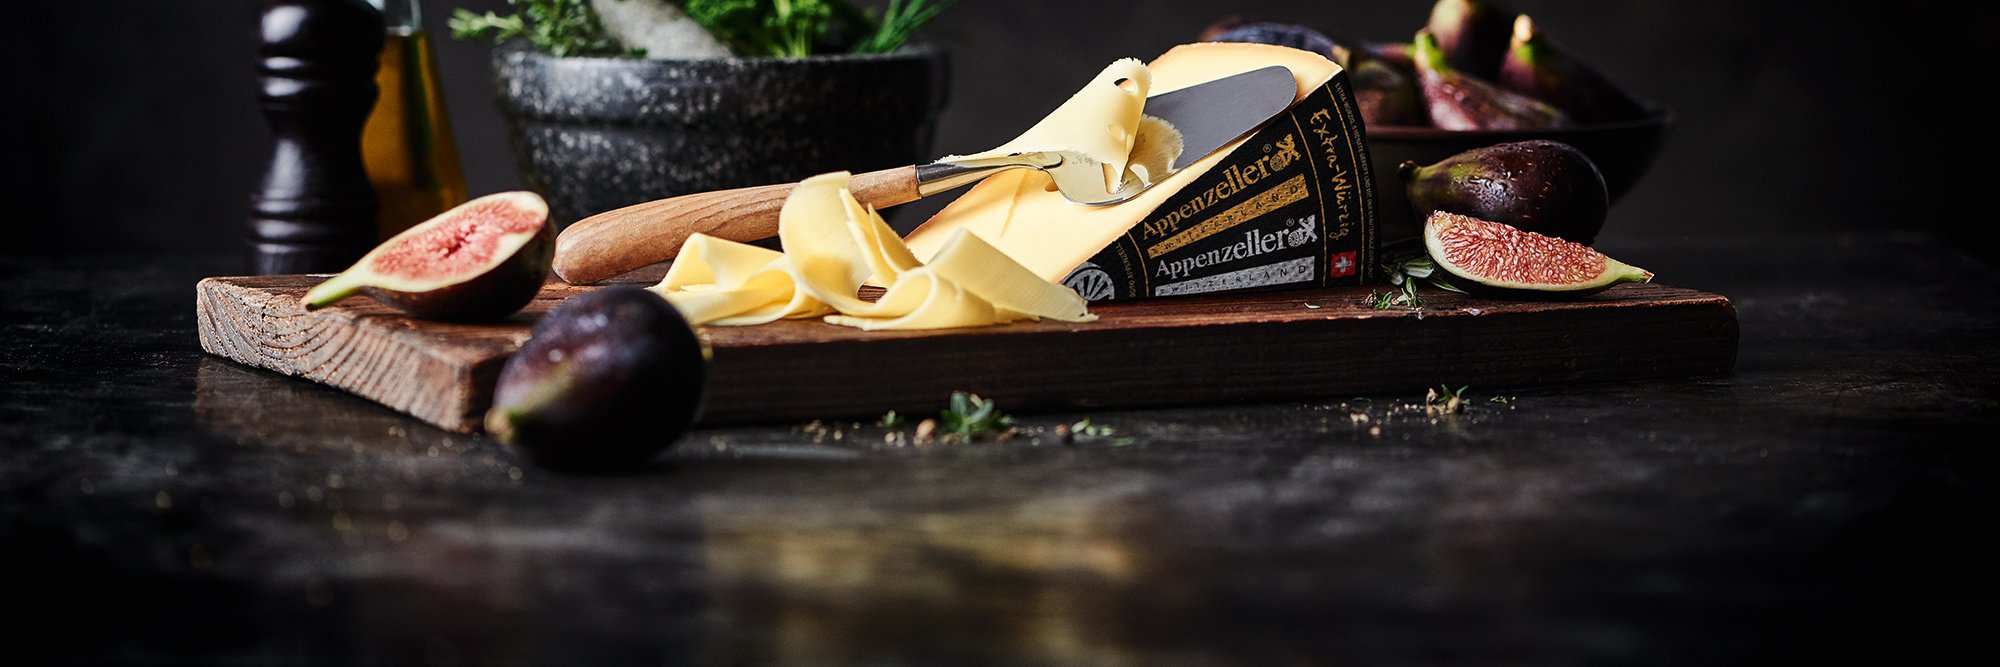 Appenzeller cheese is versatile and also tastes great in combination with fruit.